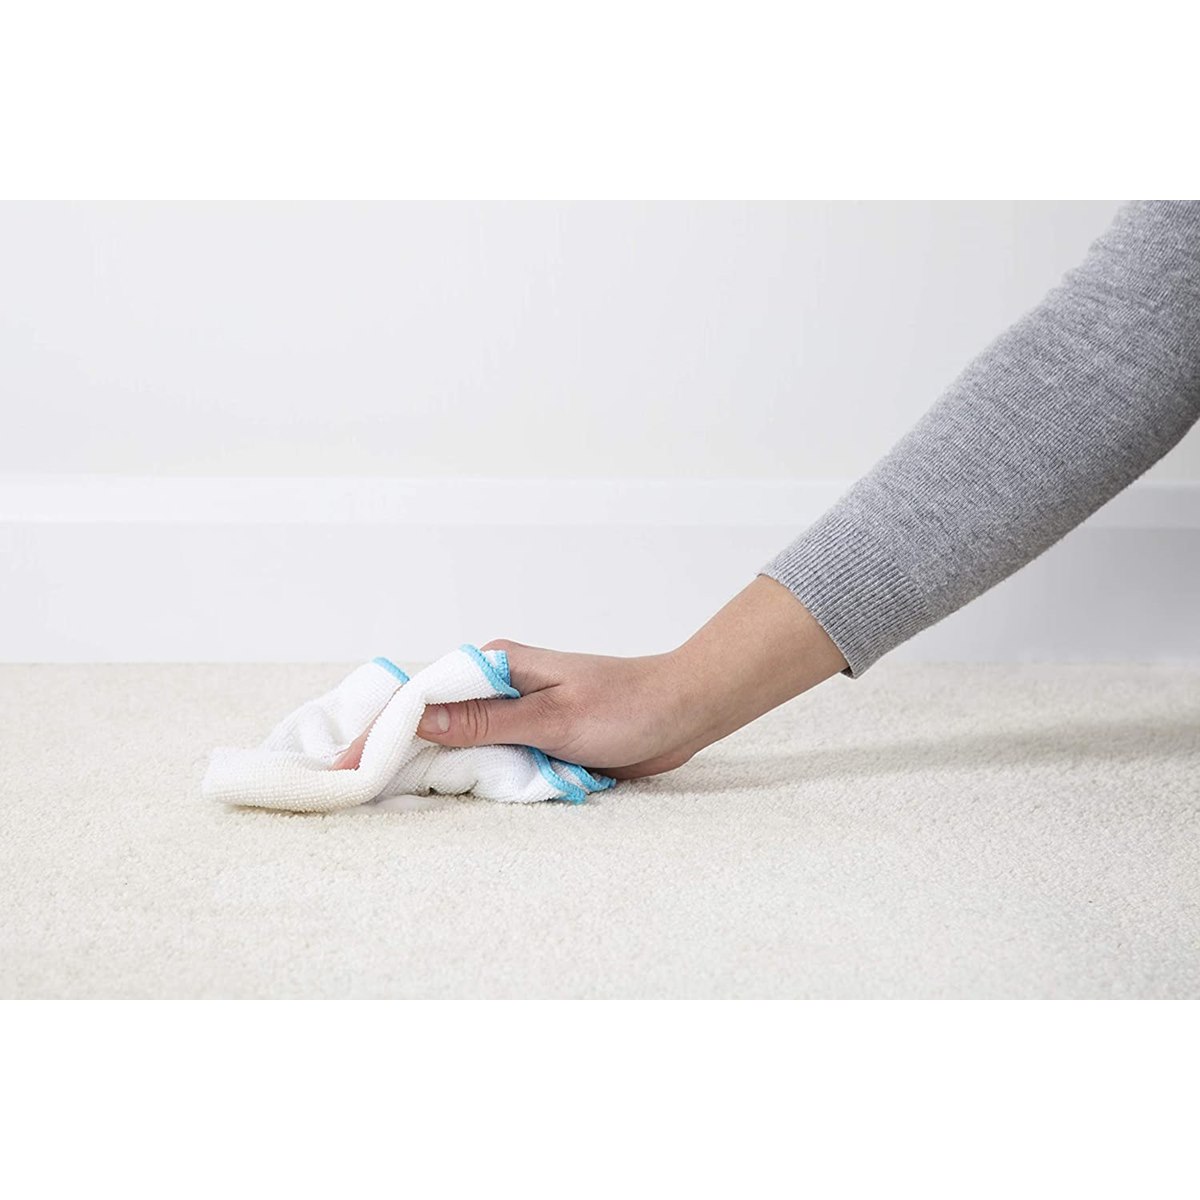 How to Remove Urine Stains from Carpets